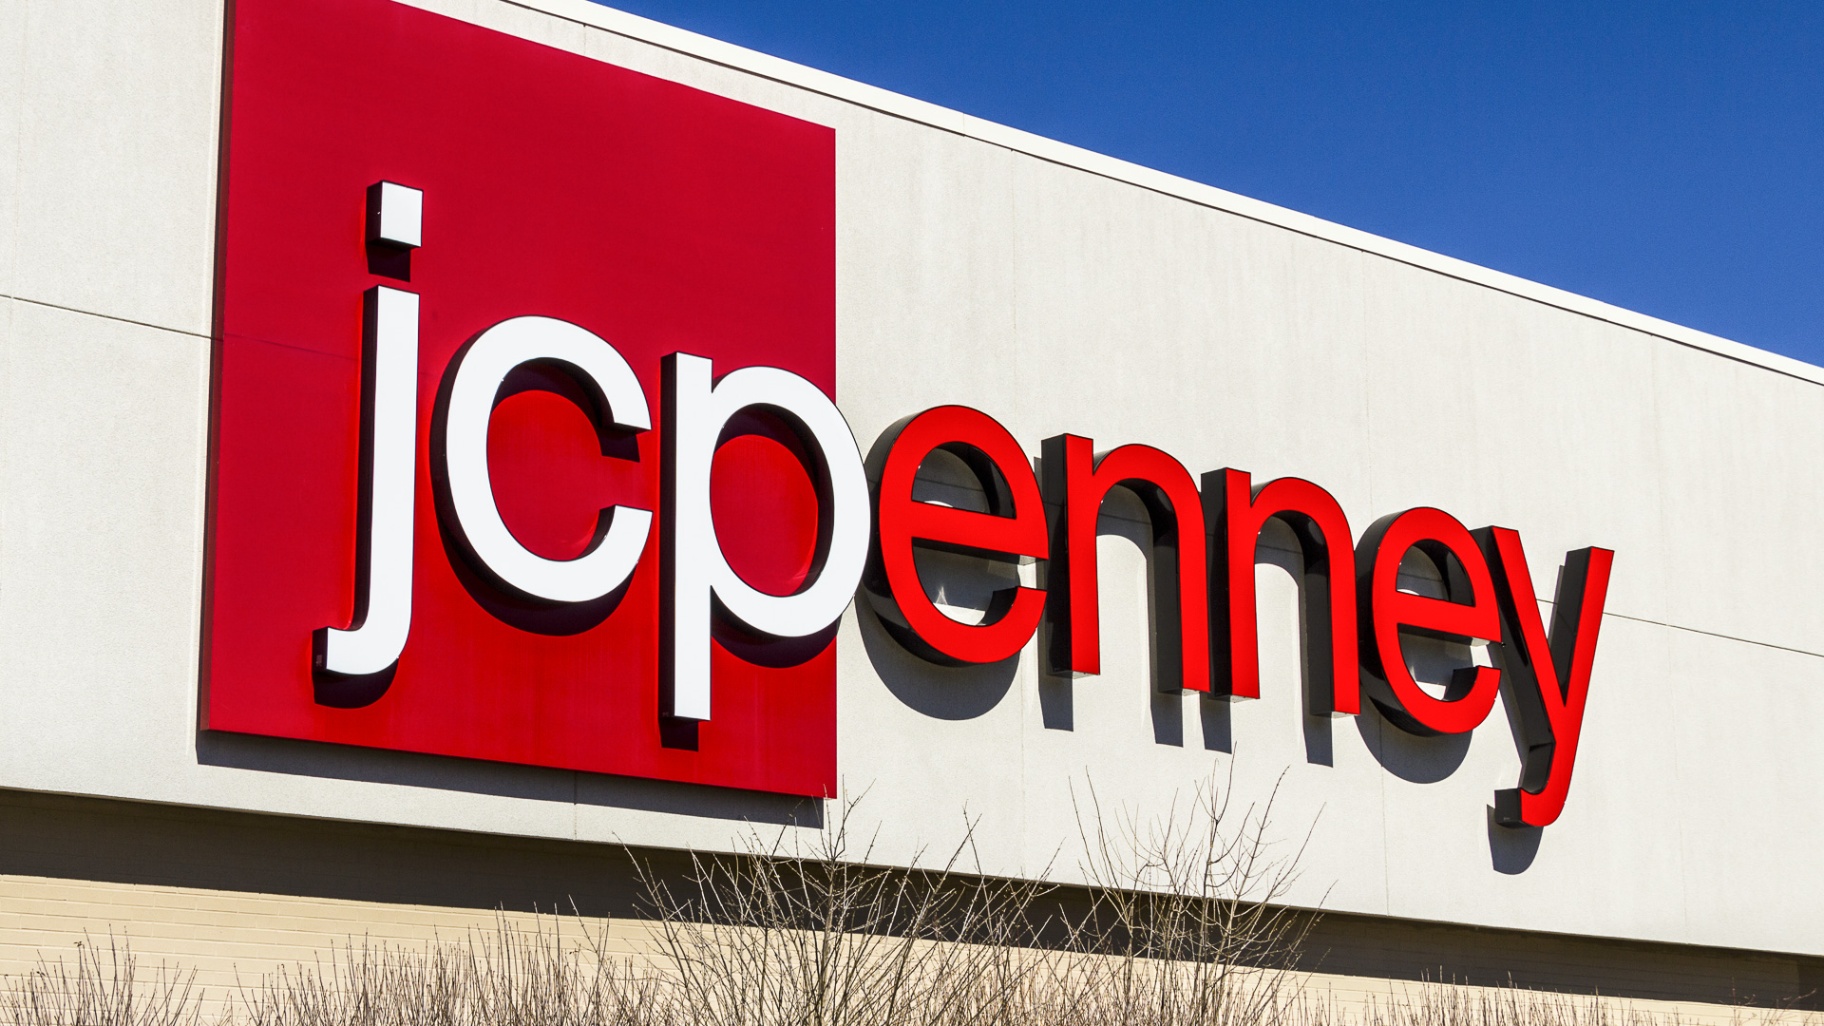 JCPenney - How to Get the Credit Card